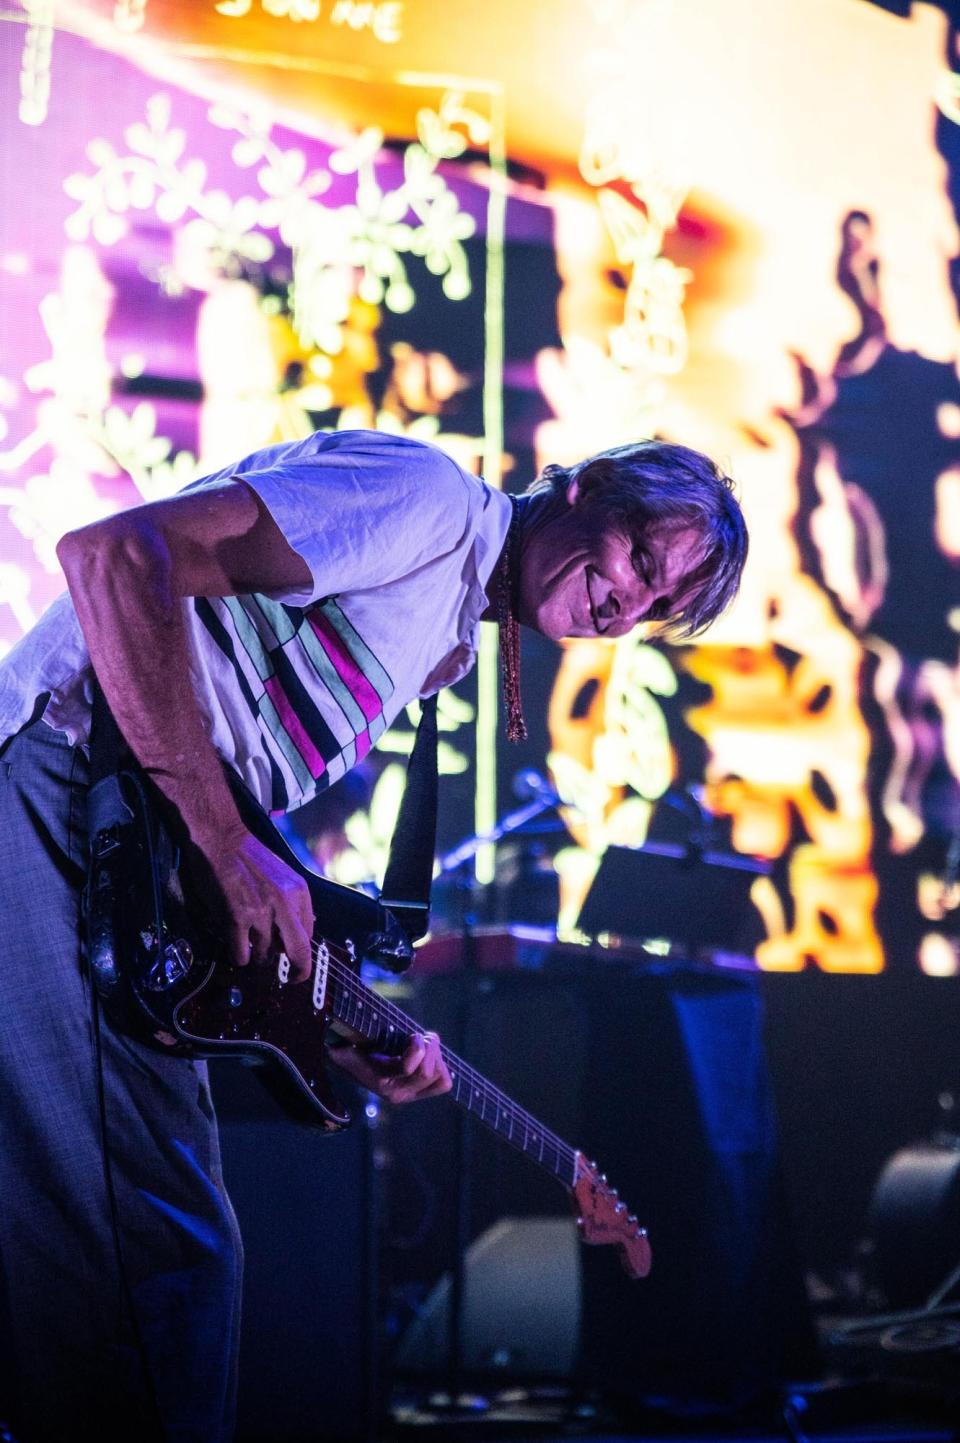 These days, Malkmus is a massively better guitarist than he was in his not-exactly-slack youth.